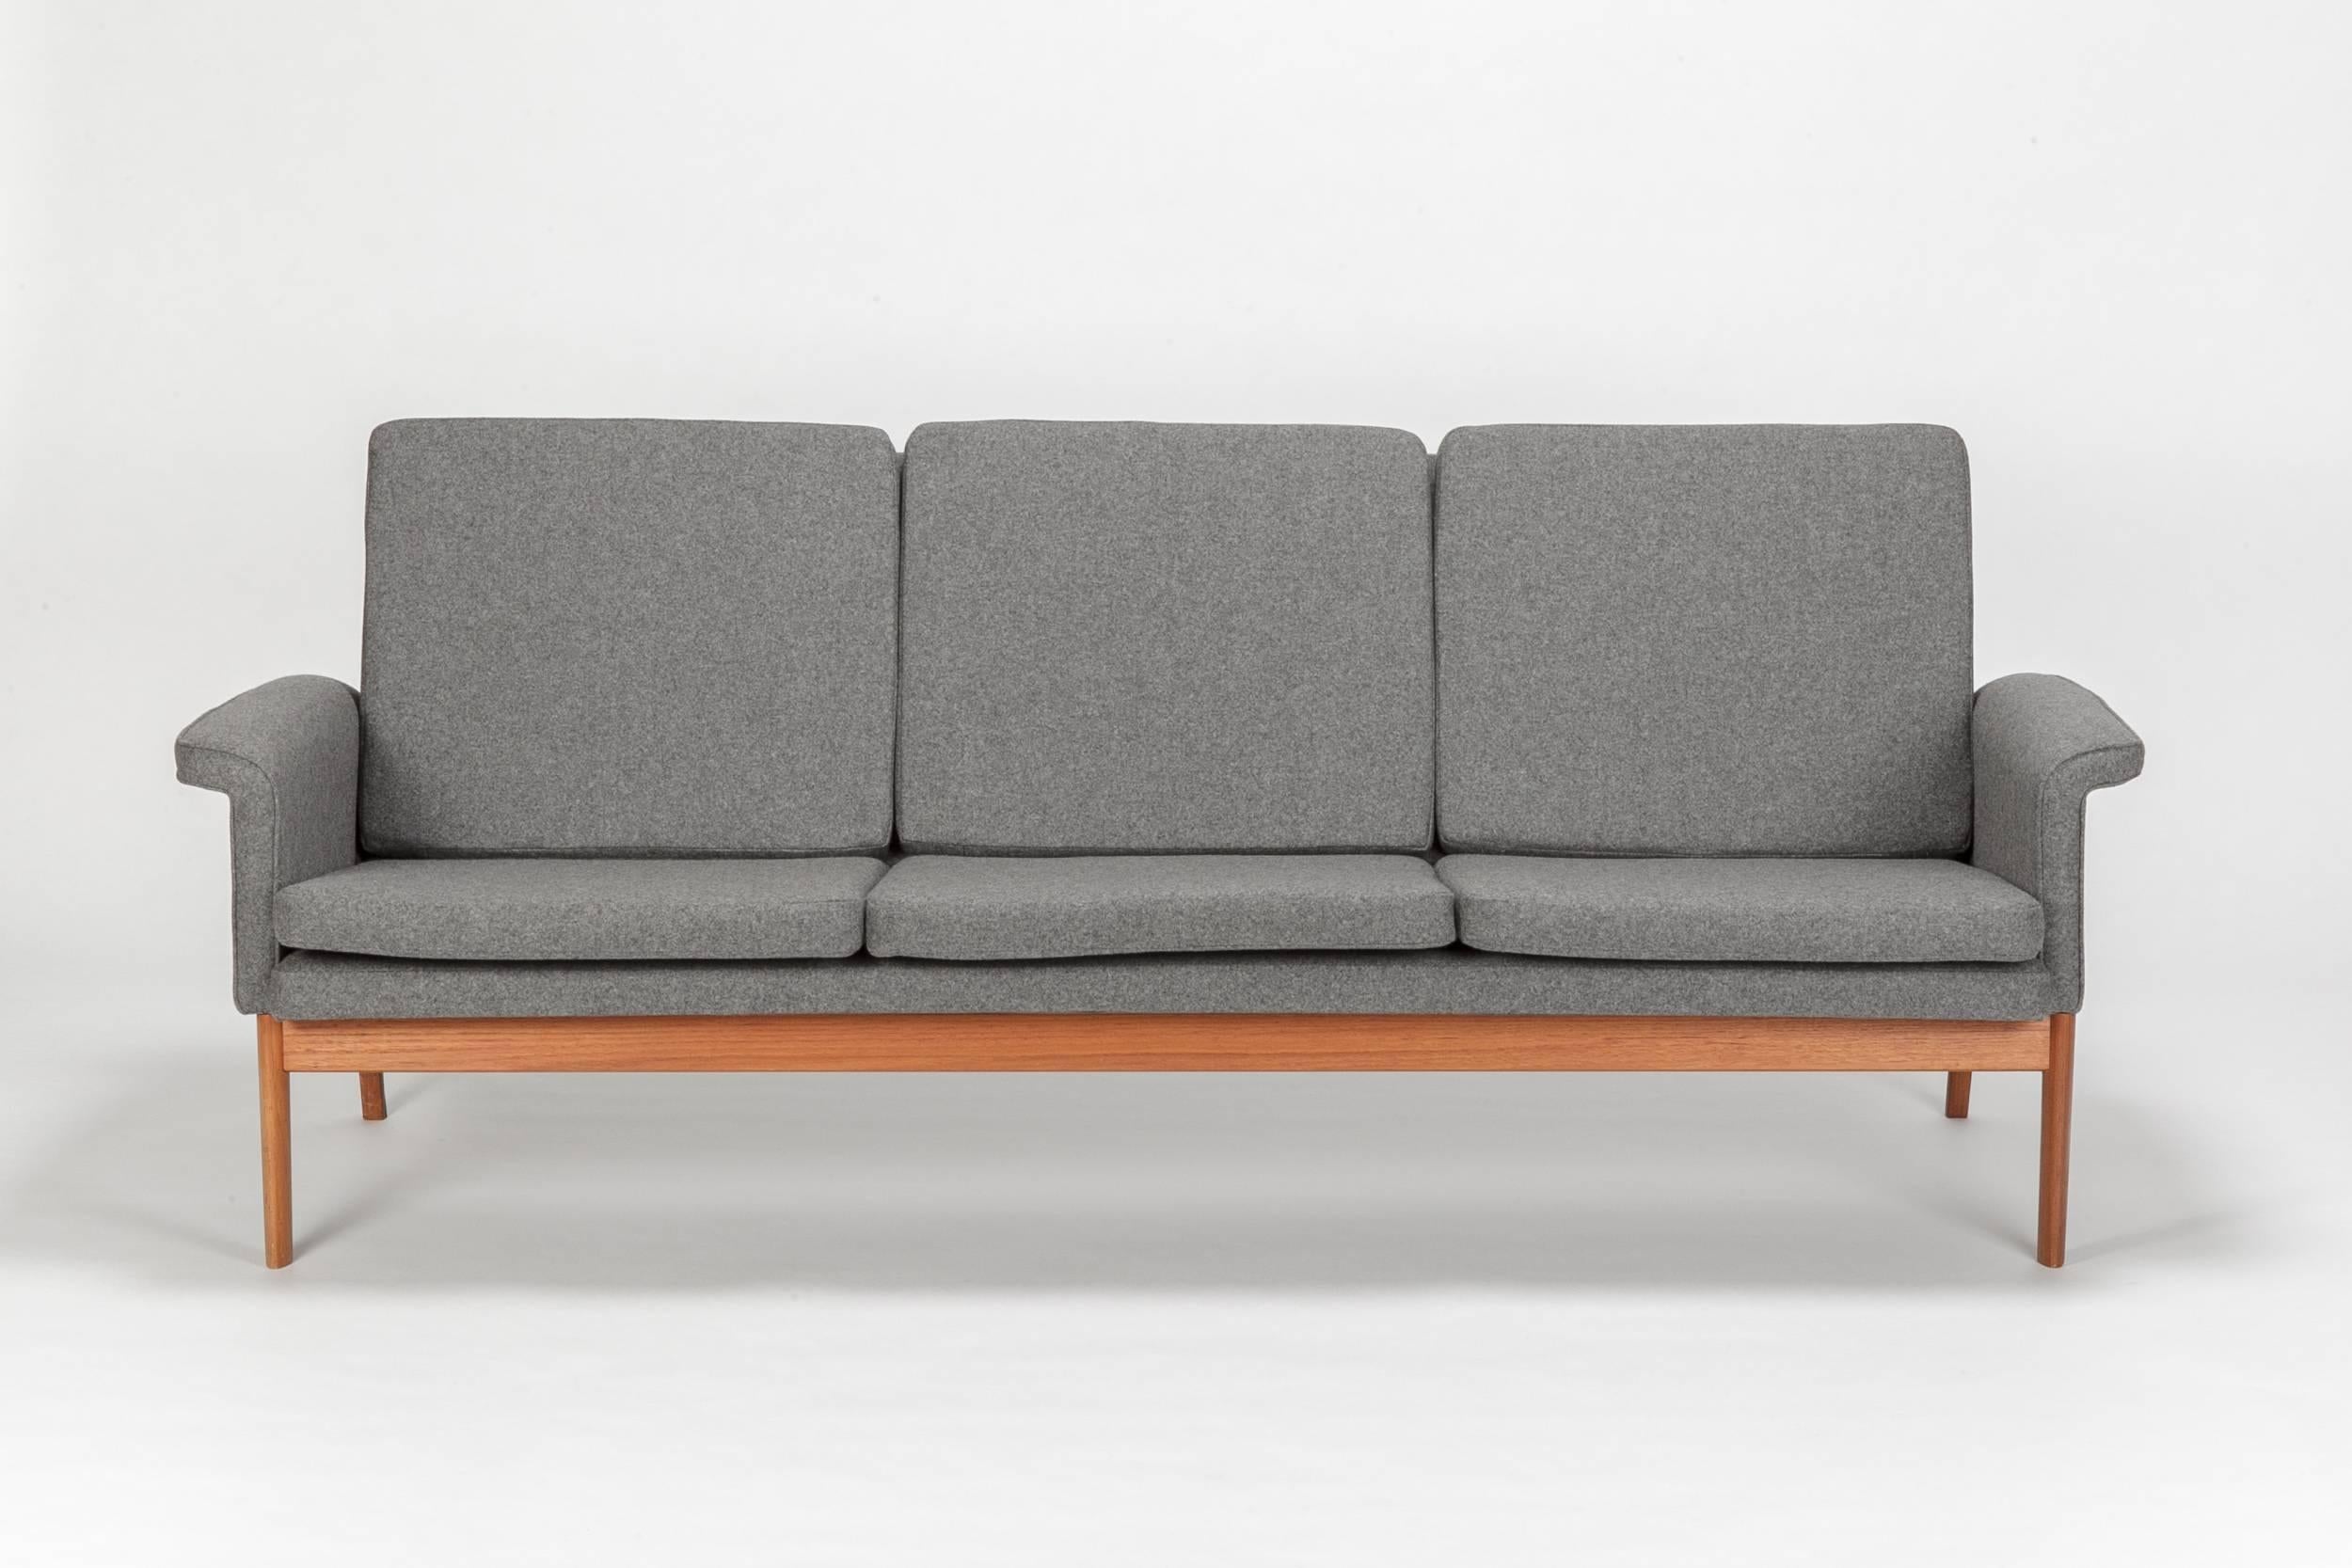 Rare Finn Juhl sofa, model No 218 “Jupiter” for France & Son. Designed in 1965 and manufactured in the late 1960s. The base is made of solid teak, new covered in a fine flannel fabric.